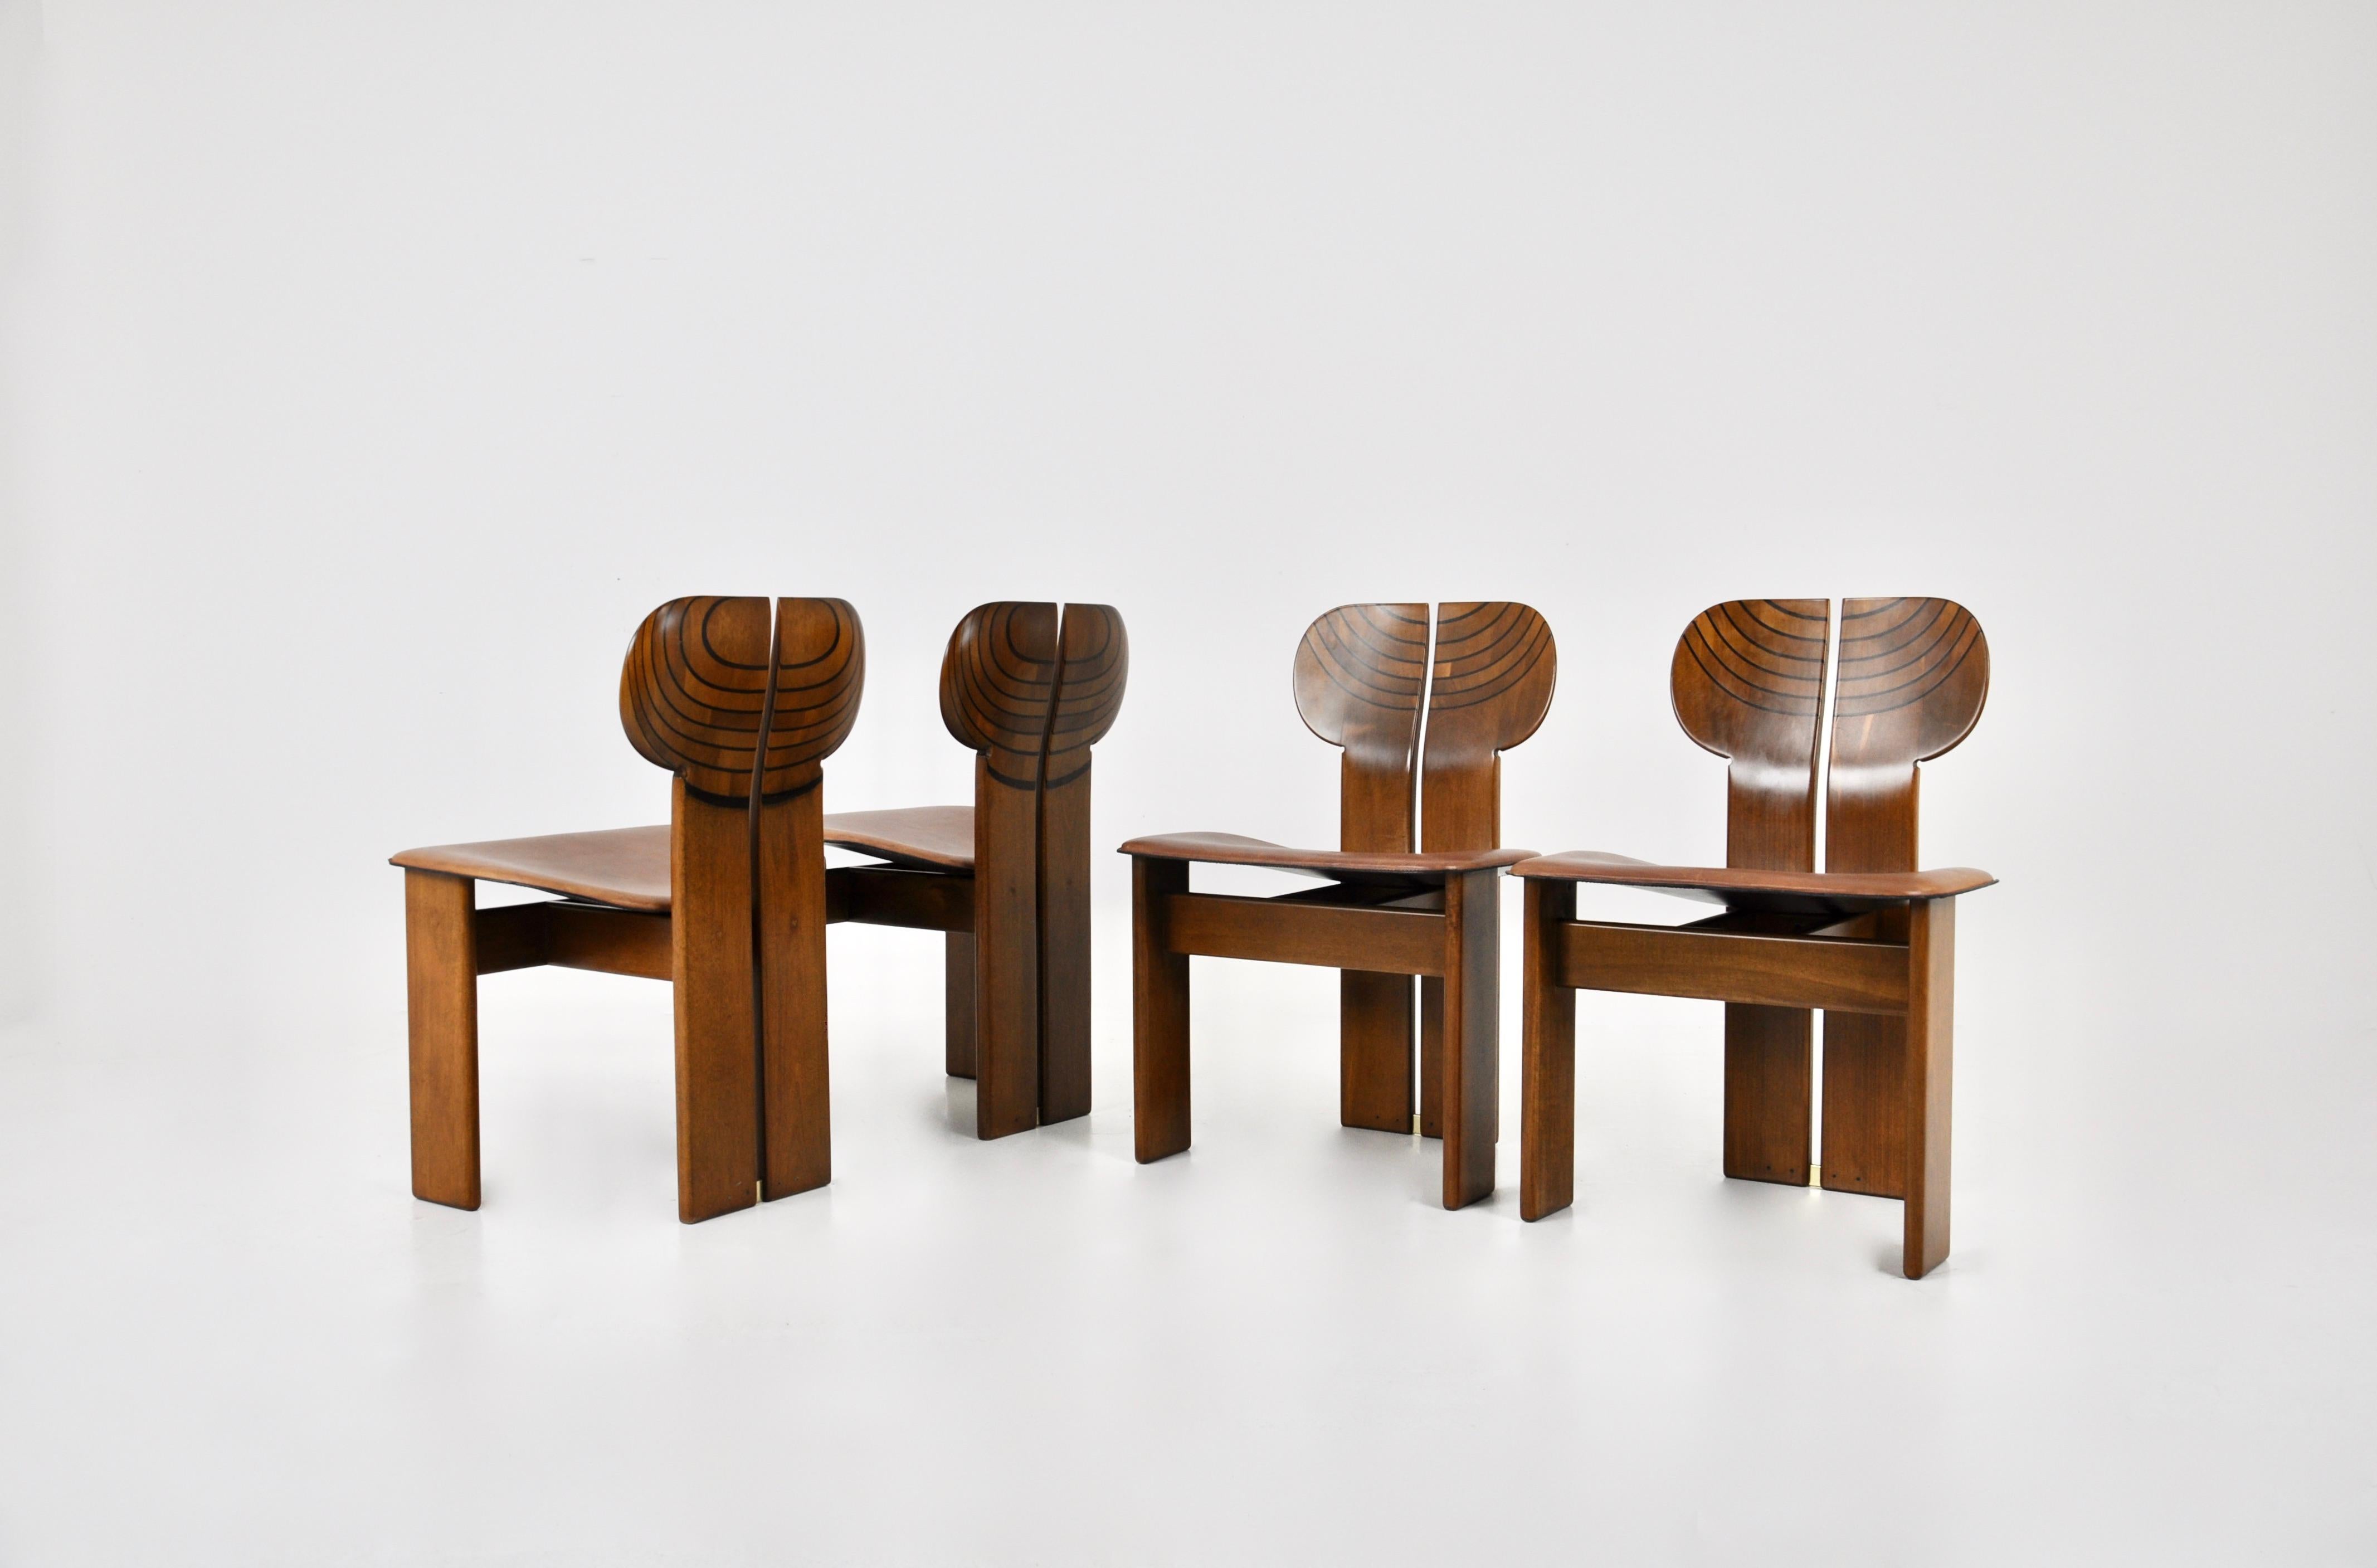 Set of 4 Africa chairs in wood and brown leather by Afra & Tobia Scarpa . Stamped. Seat height: 45 cm. Wear due to time and age of the chairs.